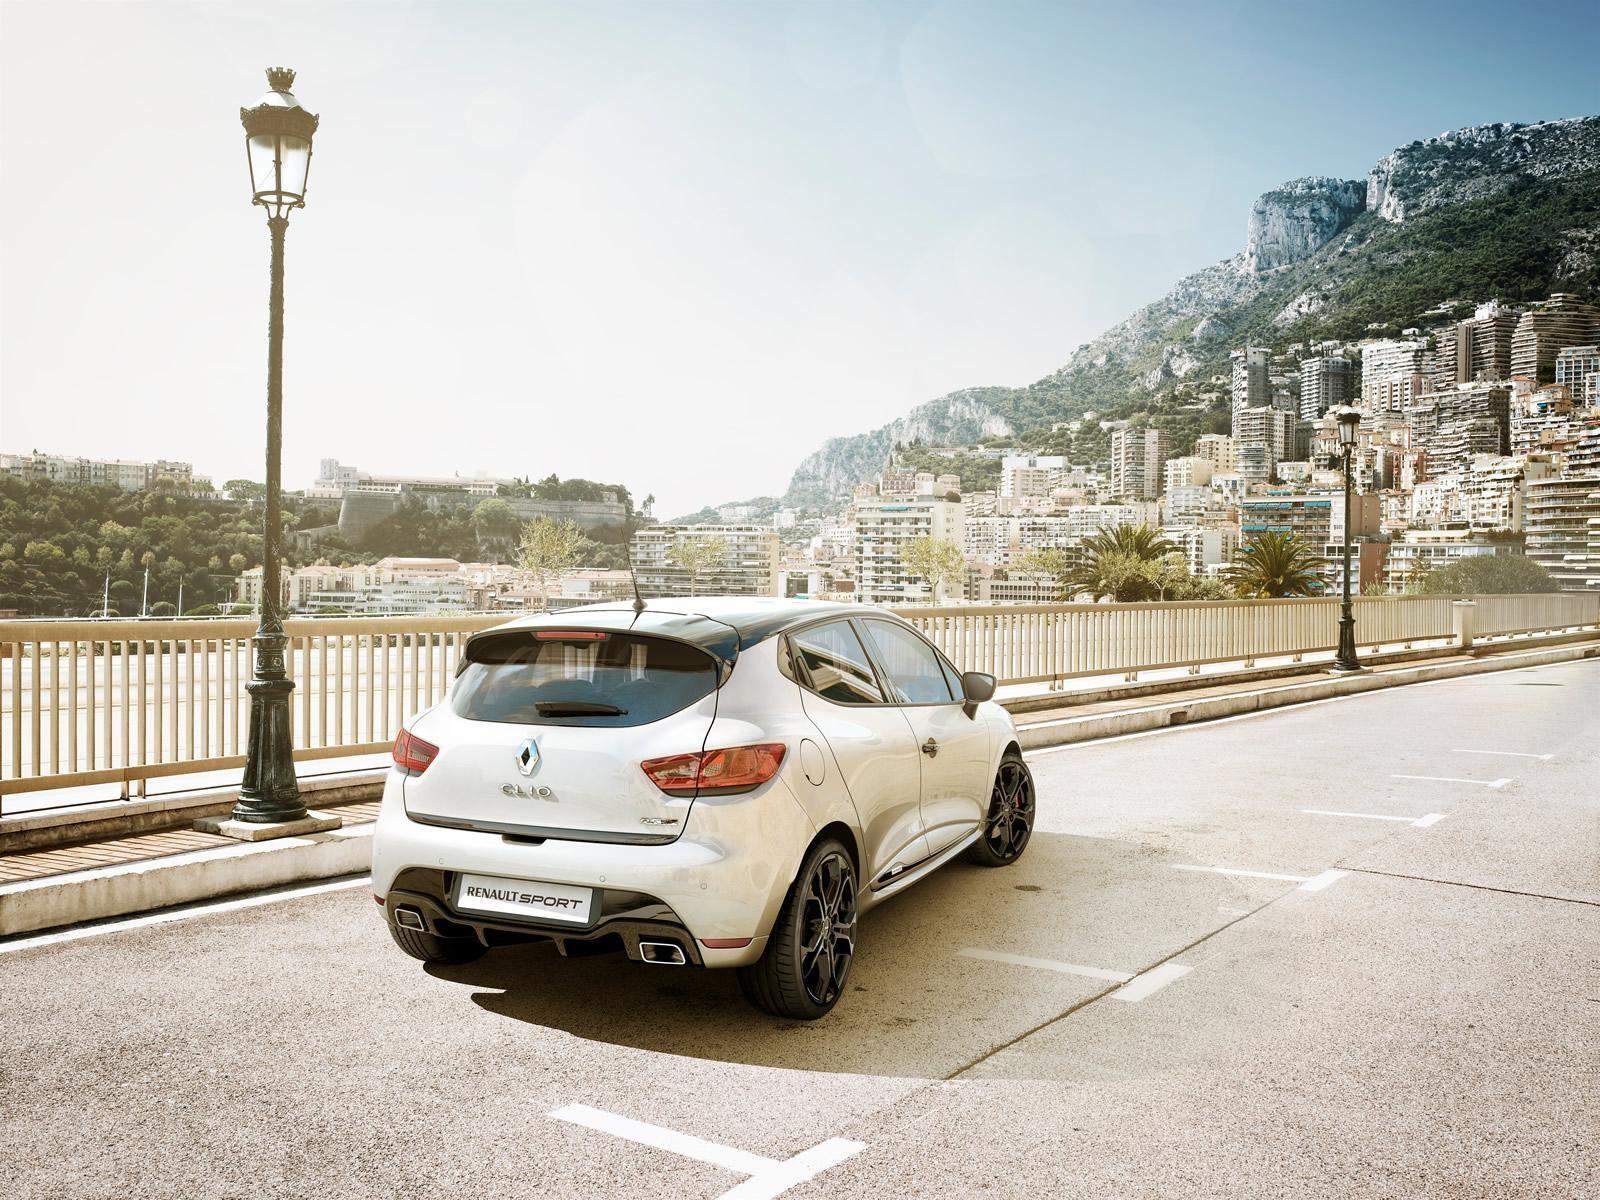 Renault Clio RS Monaco GP 2014 photo 108696 picture at high